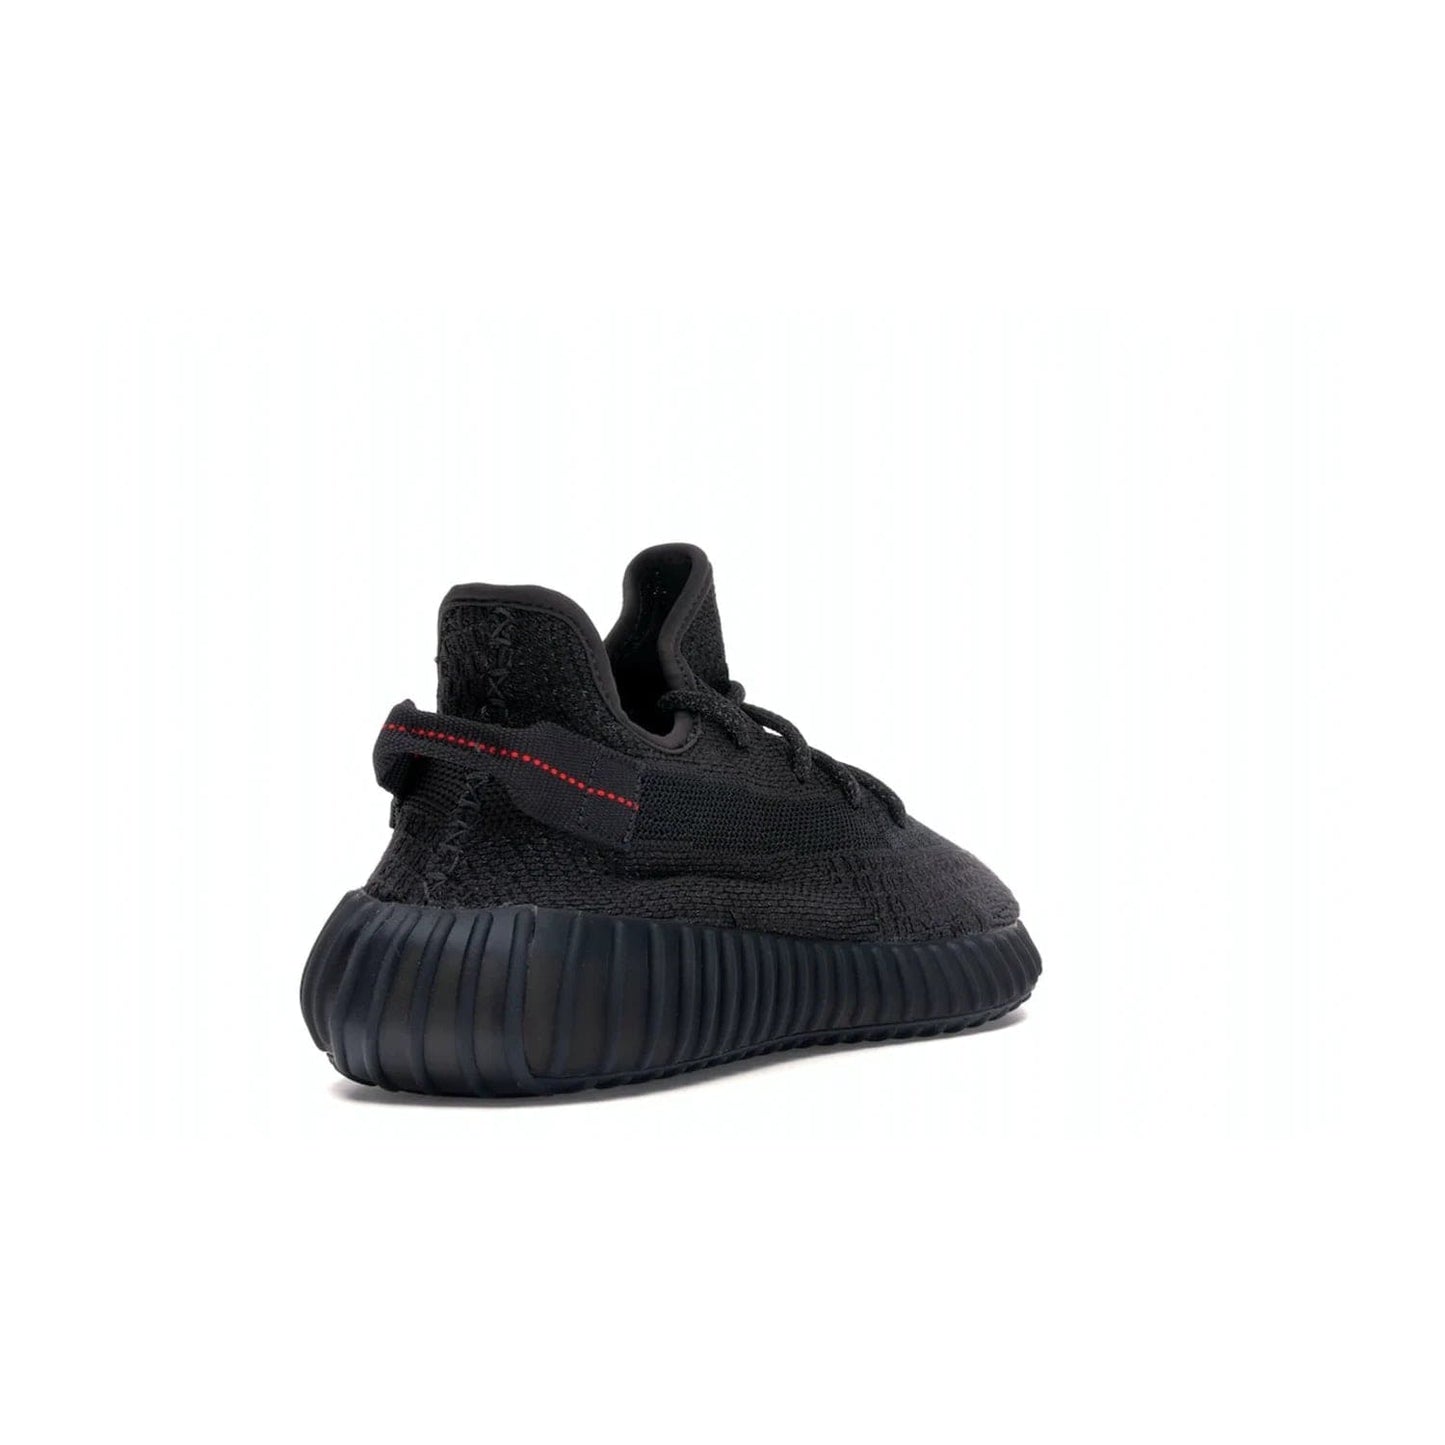 adidas Yeezy Boost 350 V2 Static Black (Reflective) - Image 31 - Only at www.BallersClubKickz.com - Make a statement with the adidas Yeezy Boost 350 V2 Static Black Reflective. All-black upper, reflective accents, midsole, and sole combine for a stylish look. High quality materials. June 2019 release. Add to your collection today.